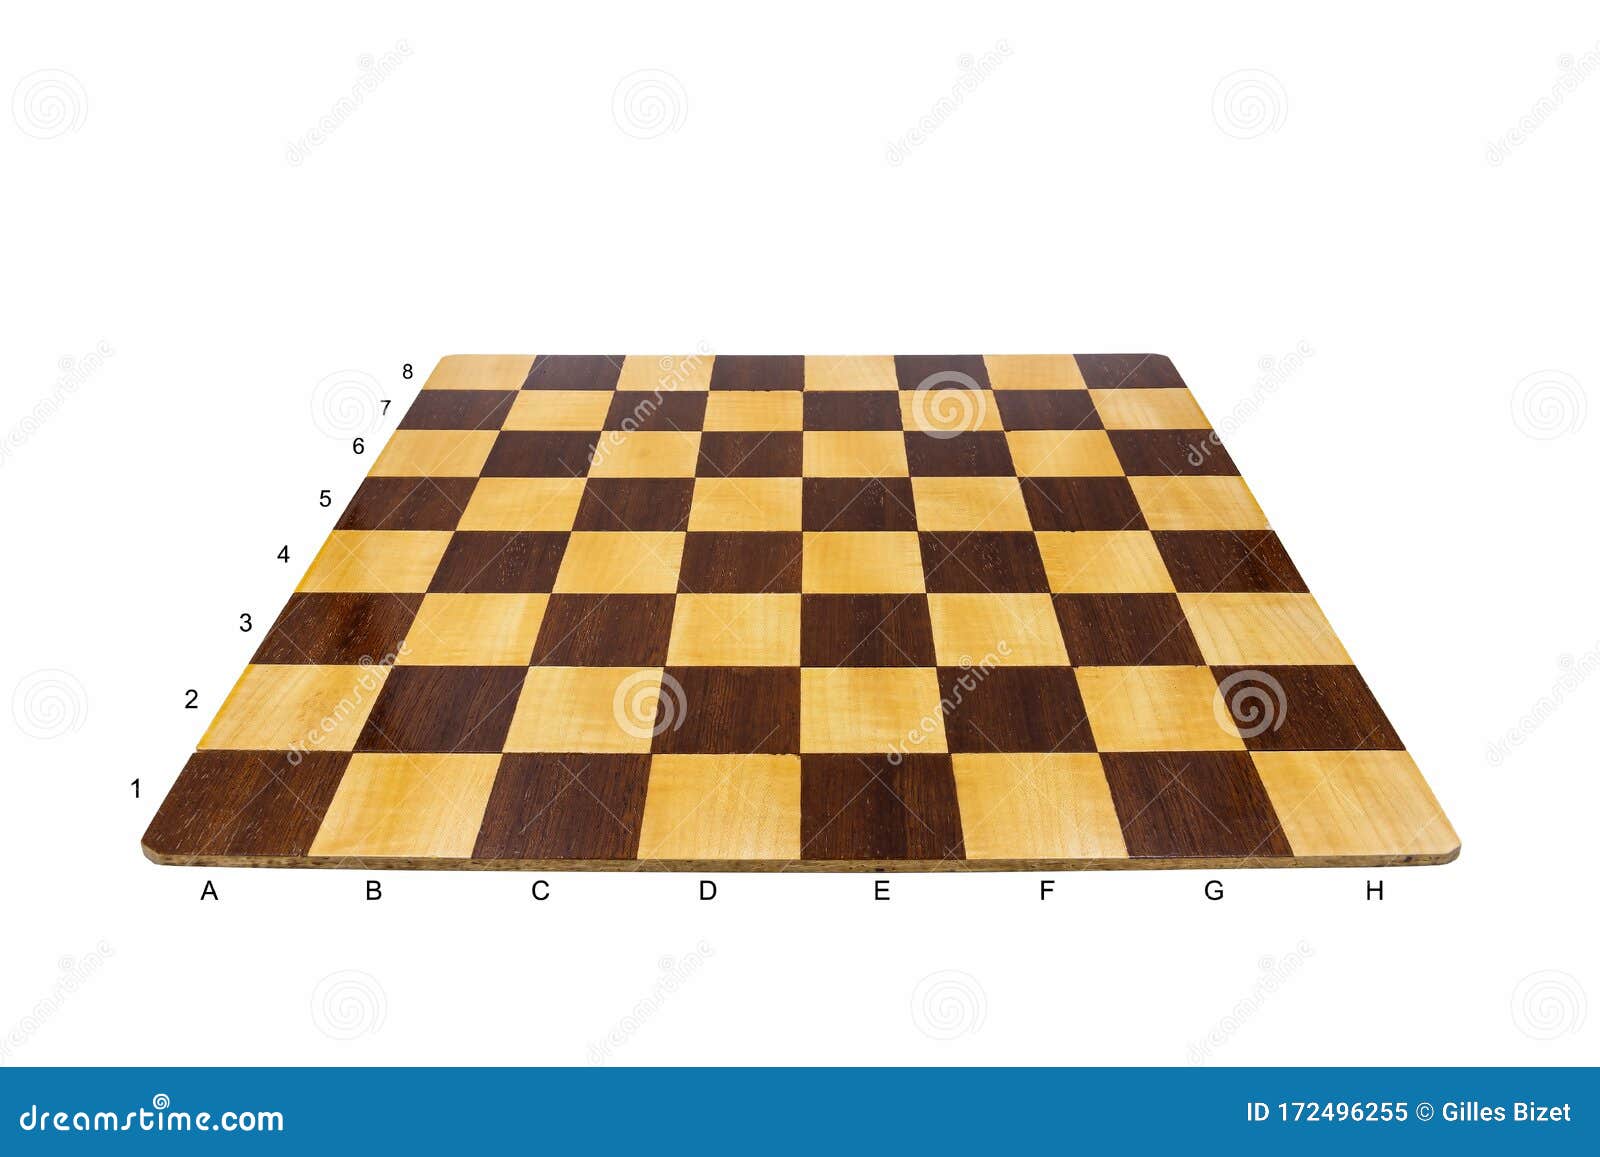 empty chess board with coordinates  on white